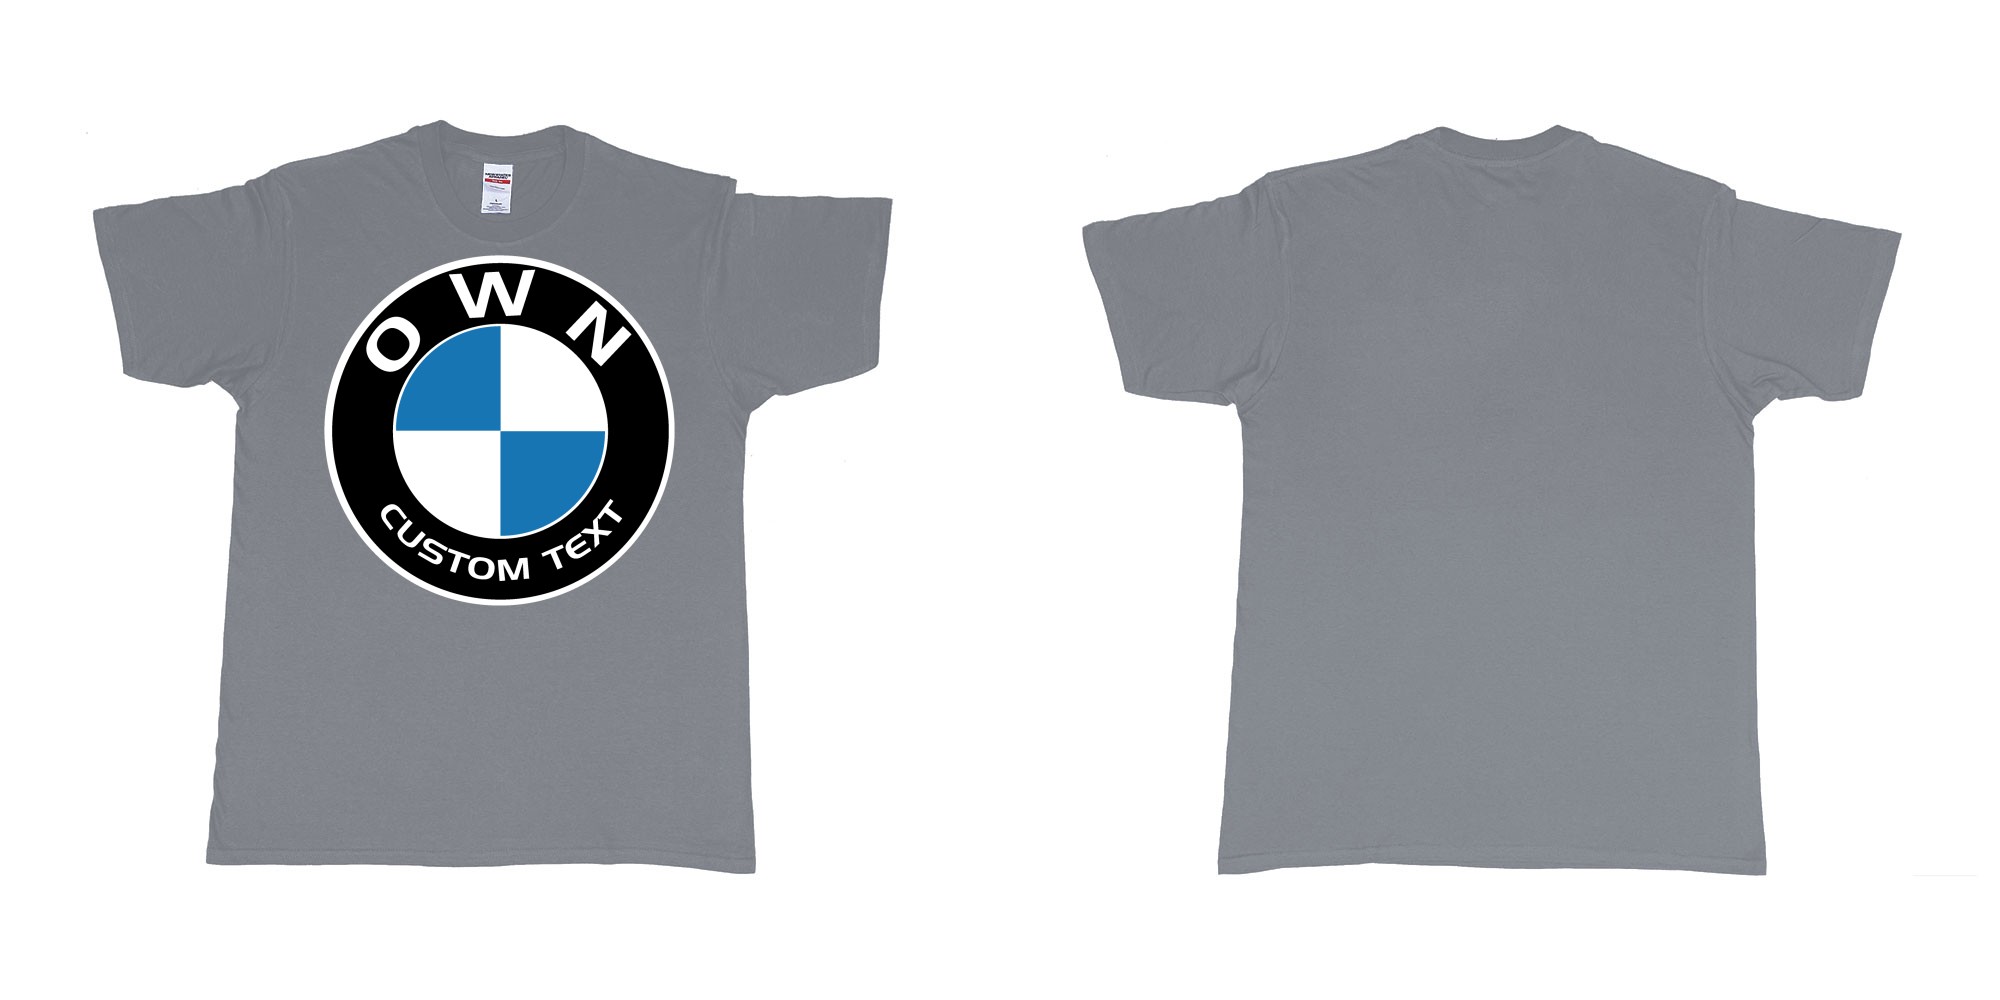 Custom tshirt design BMW logo custom text tshirt printing in fabric color misty choice your own text made in Bali by The Pirate Way